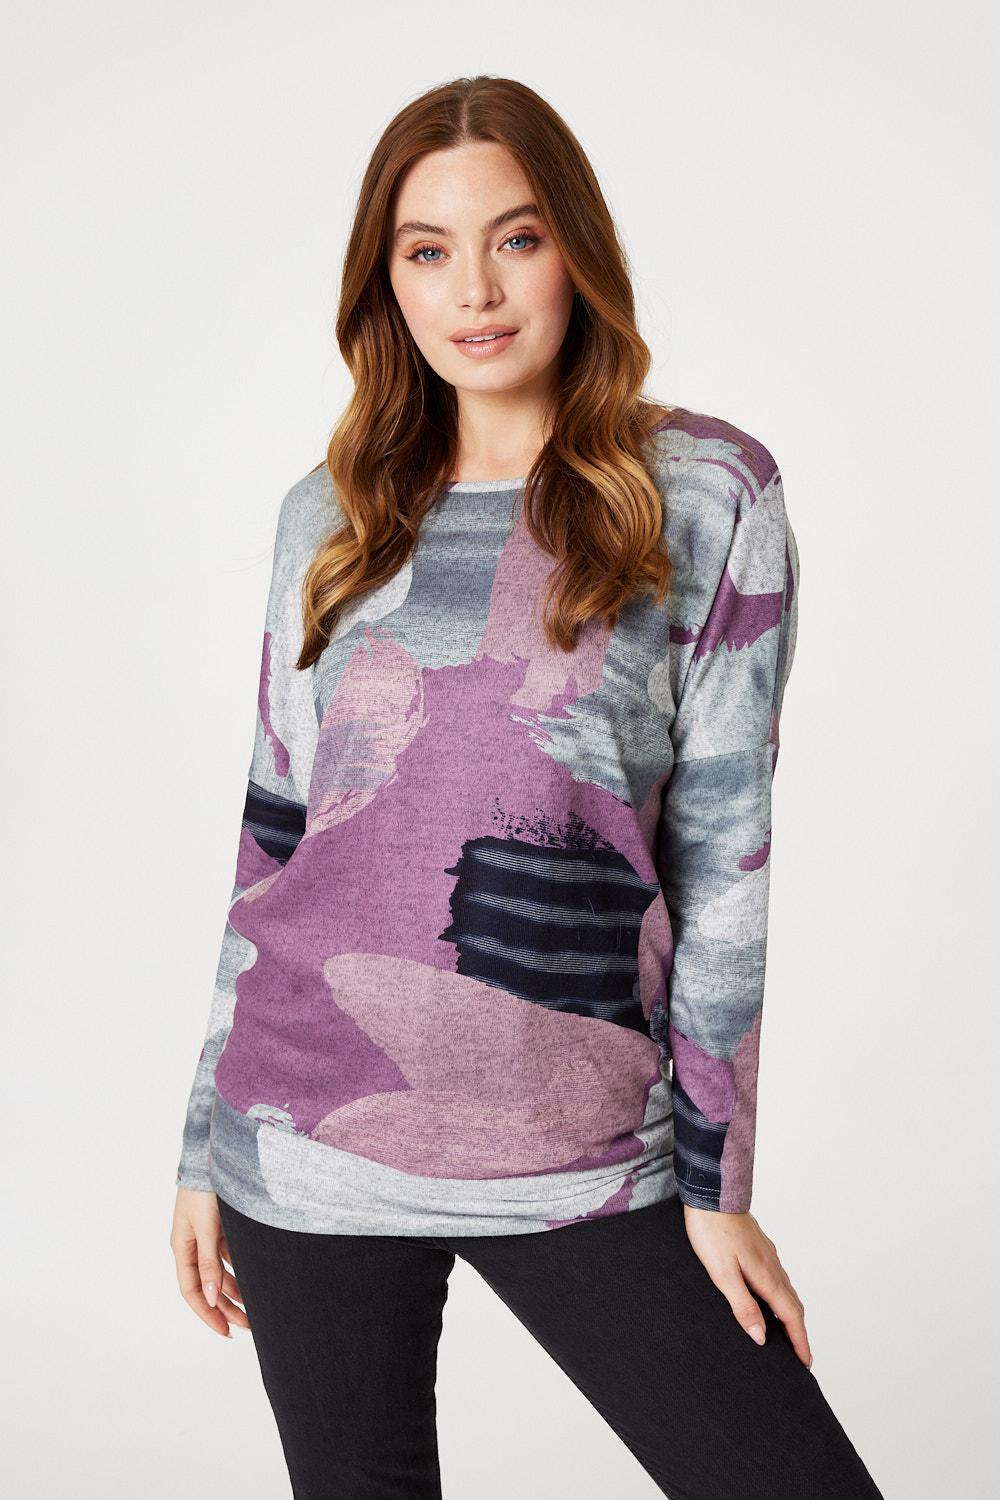 Pink | Brushstroke Print Relaxed Top : Model is 5'9"/175 cm and wears UK8/EU36/US4/AUS8